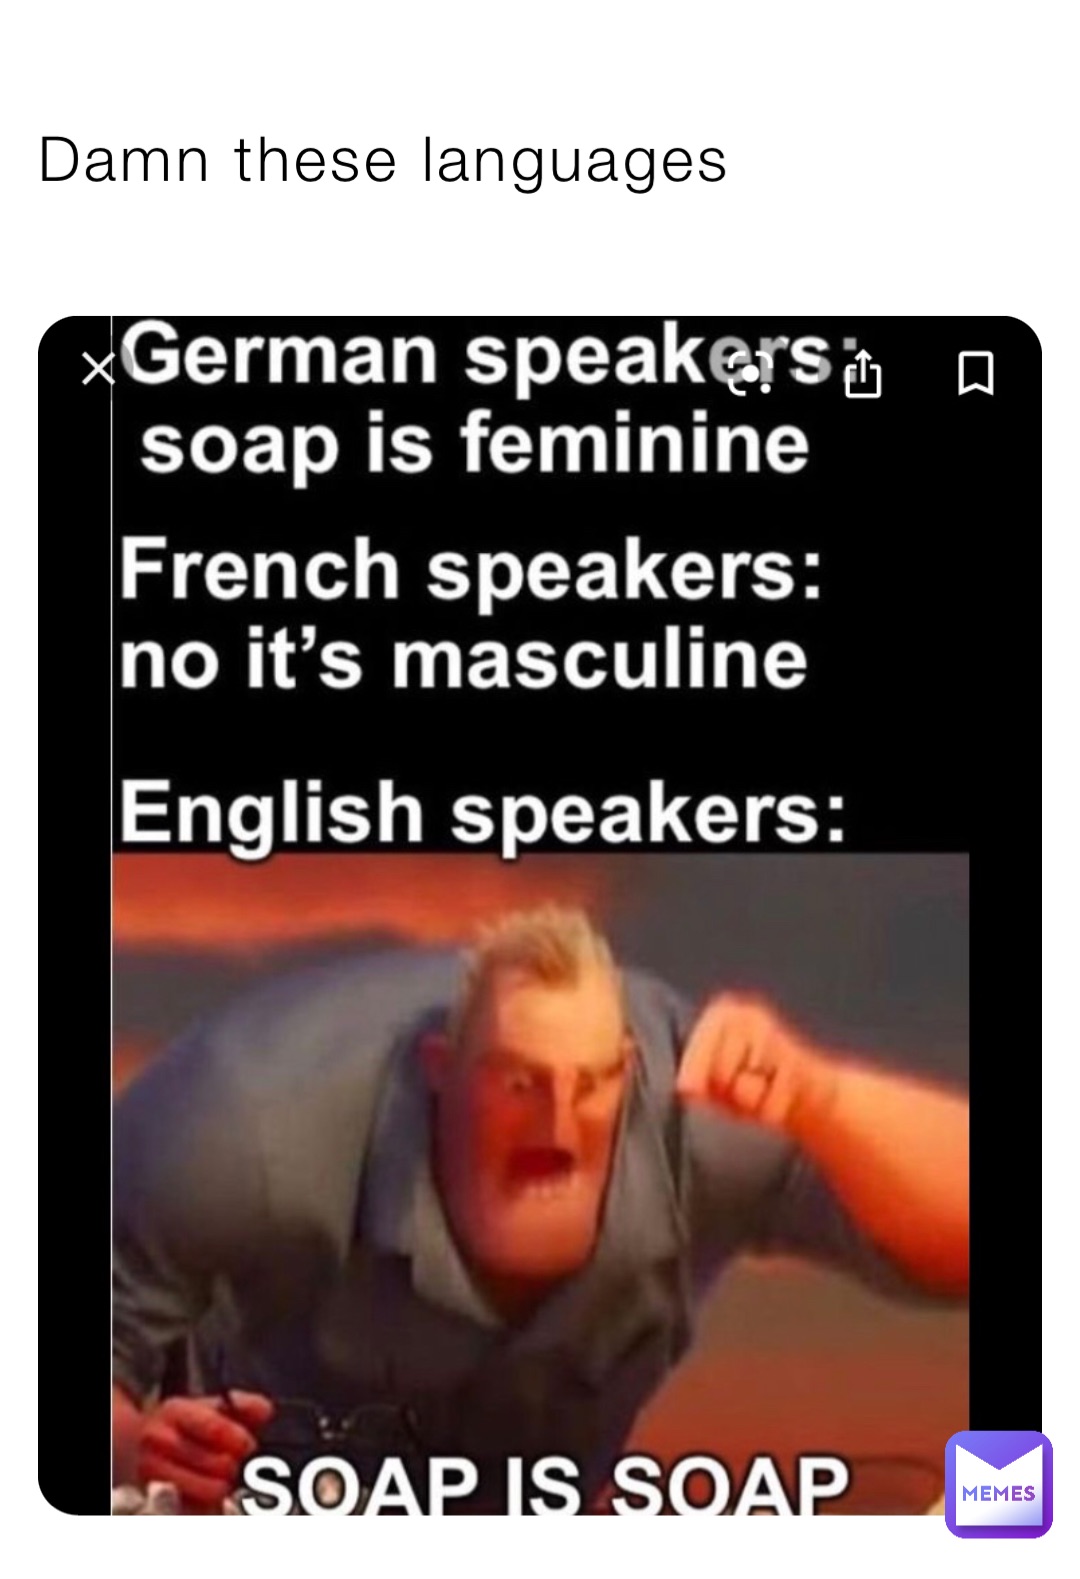 Damn these languages